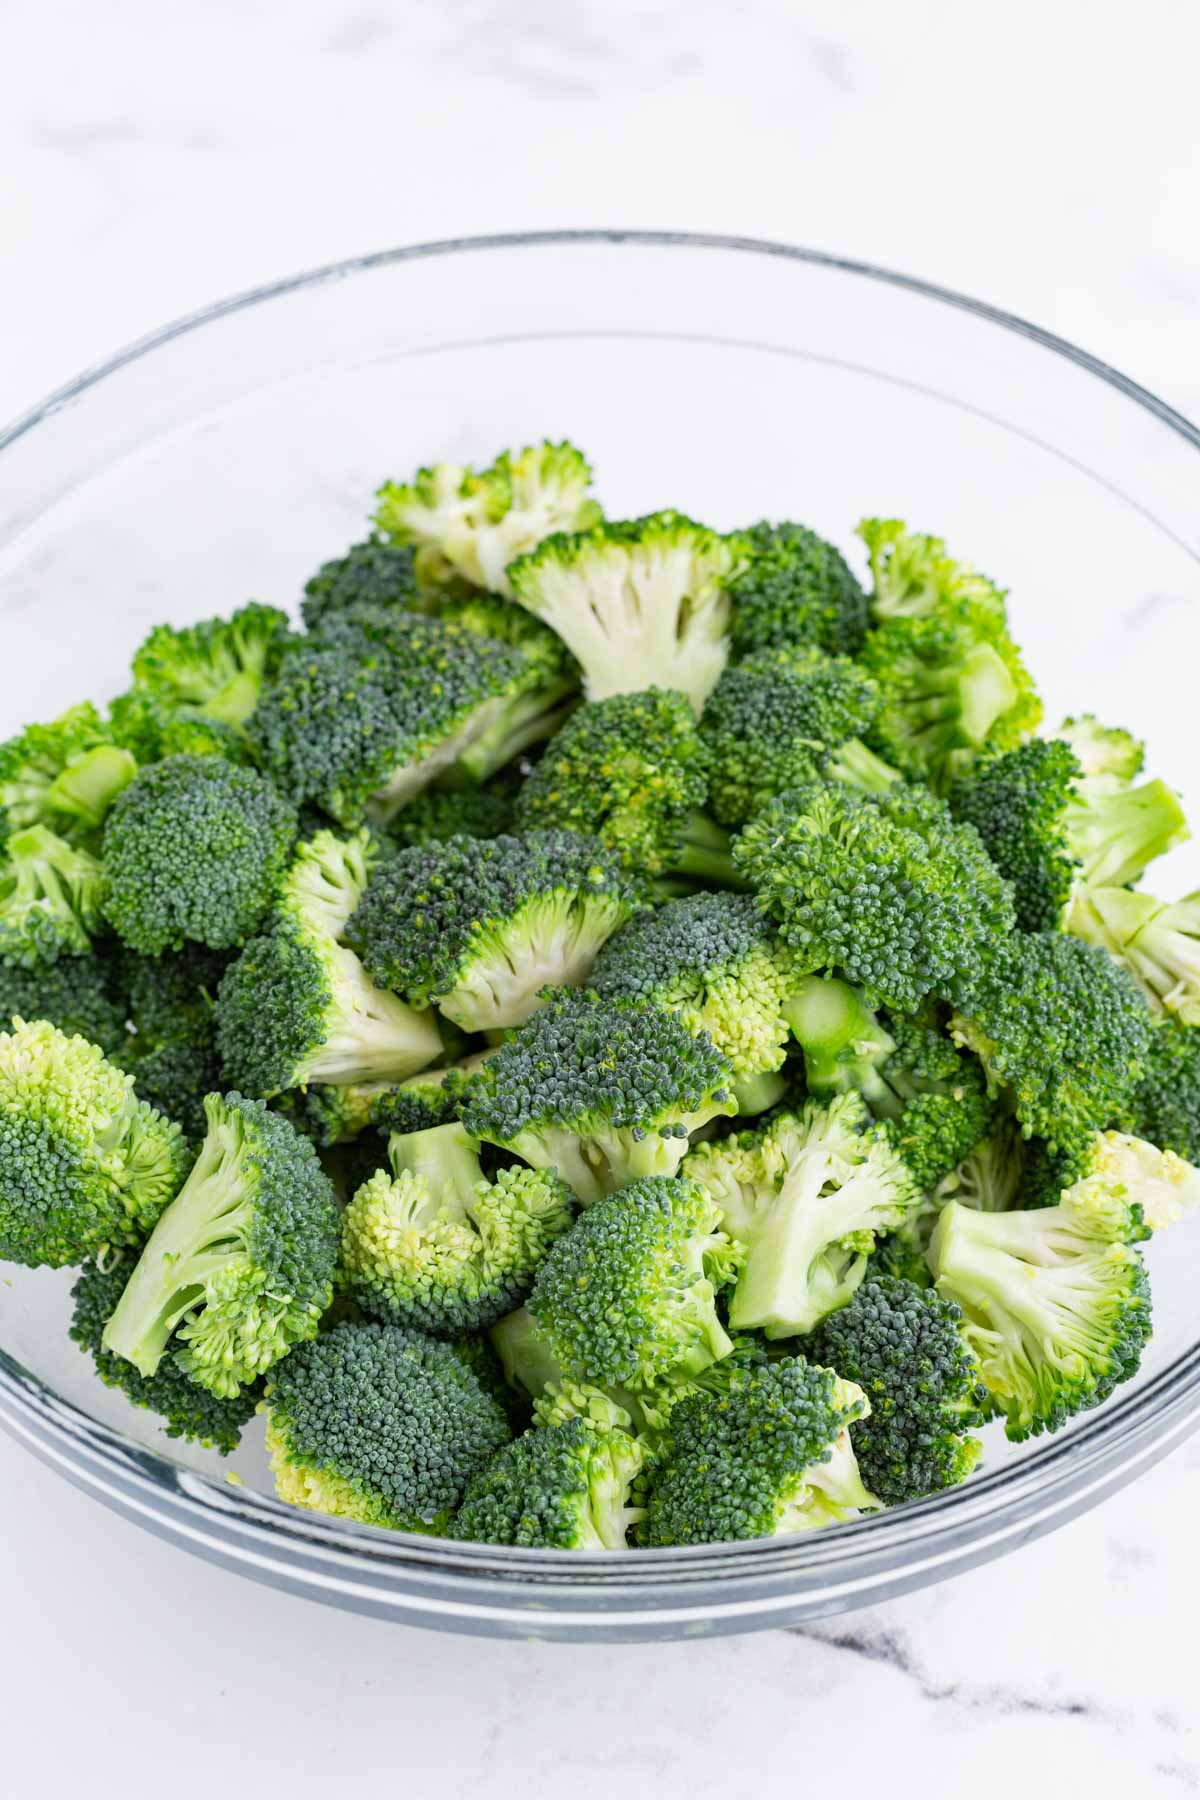 Cut up broccoli is added to a glass bowl.